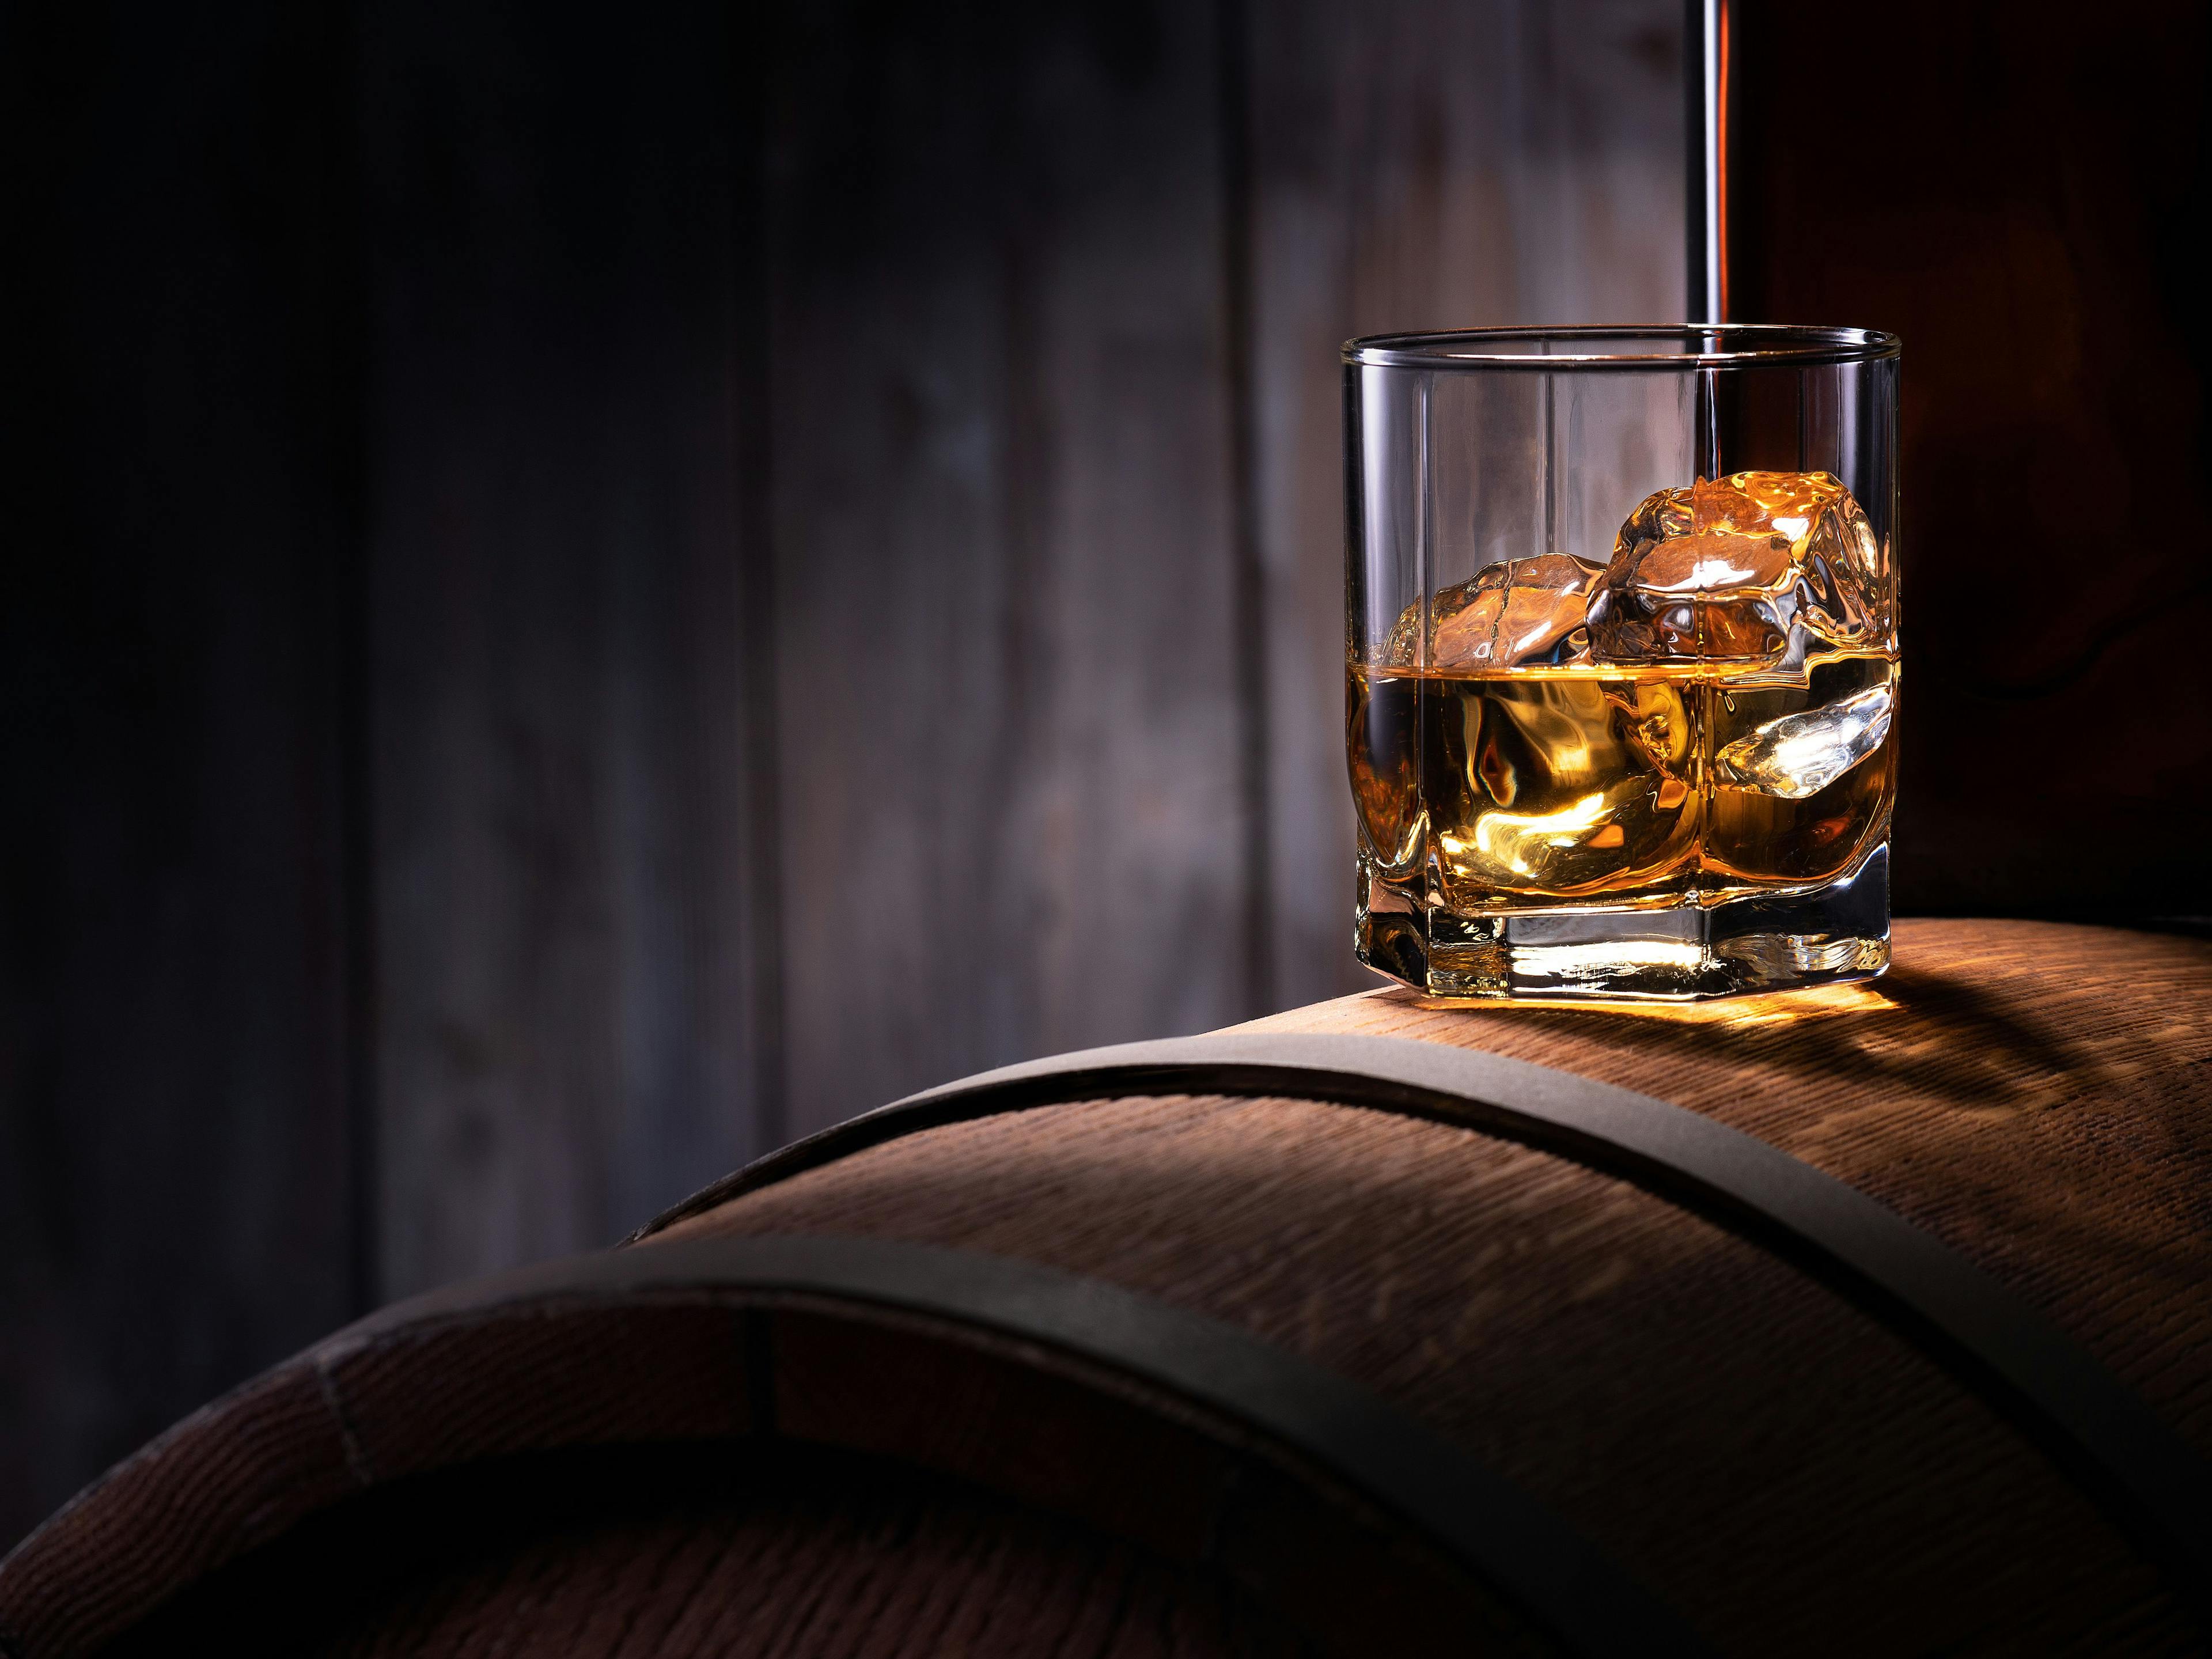 Glass of whiskey with ice cubes on the wooden barrel with wooden background | Image Credit: © Alexandr Steblovskiy - stock.adobe.com 